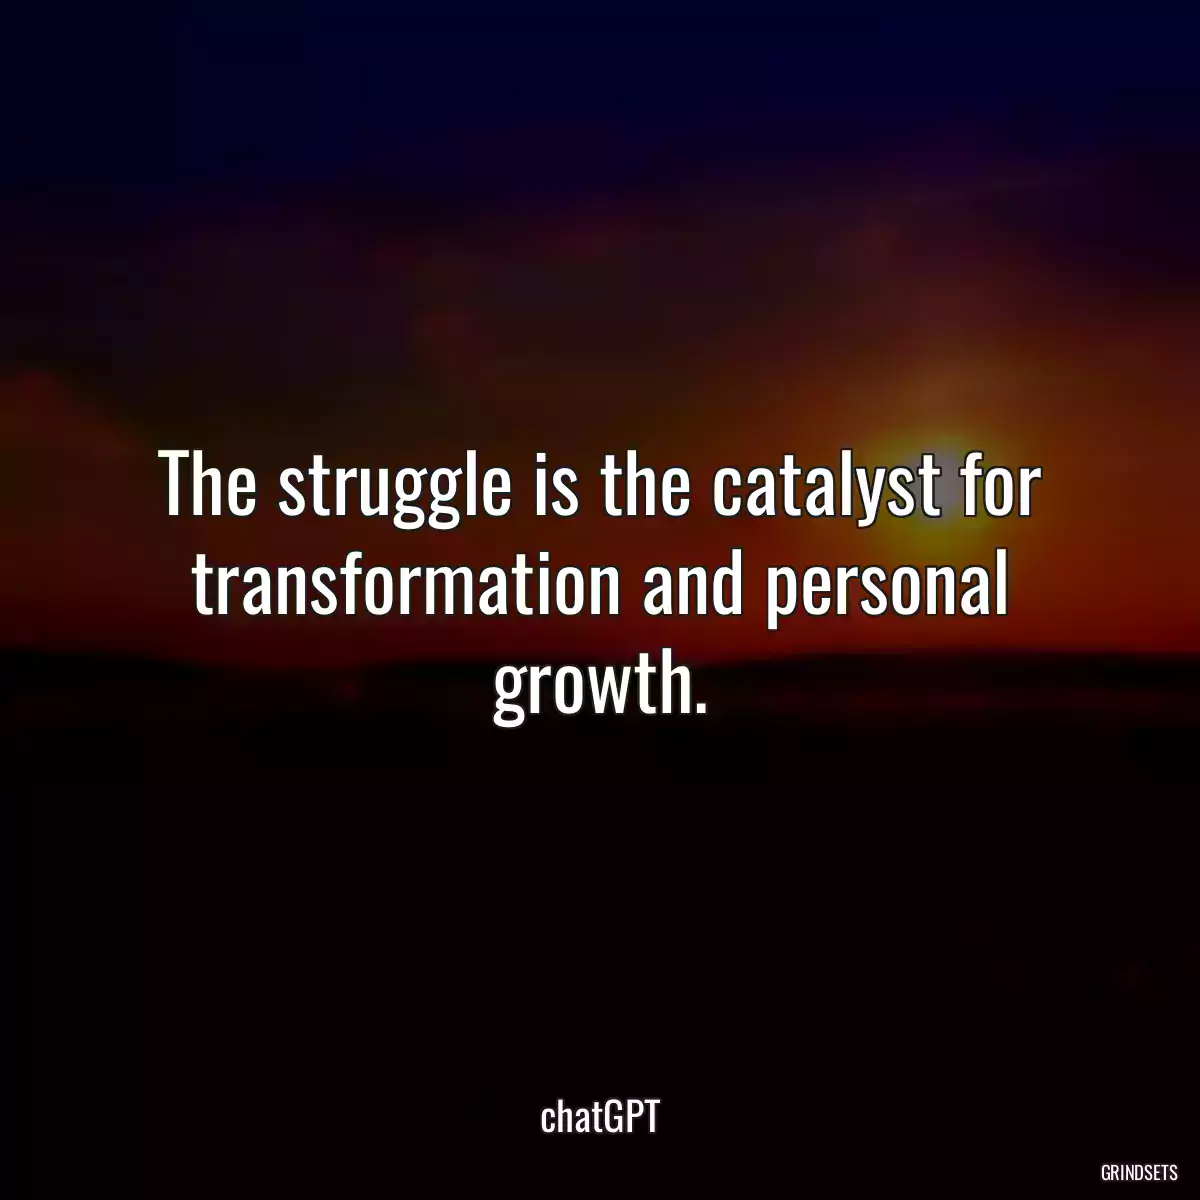 The struggle is the catalyst for transformation and personal growth.